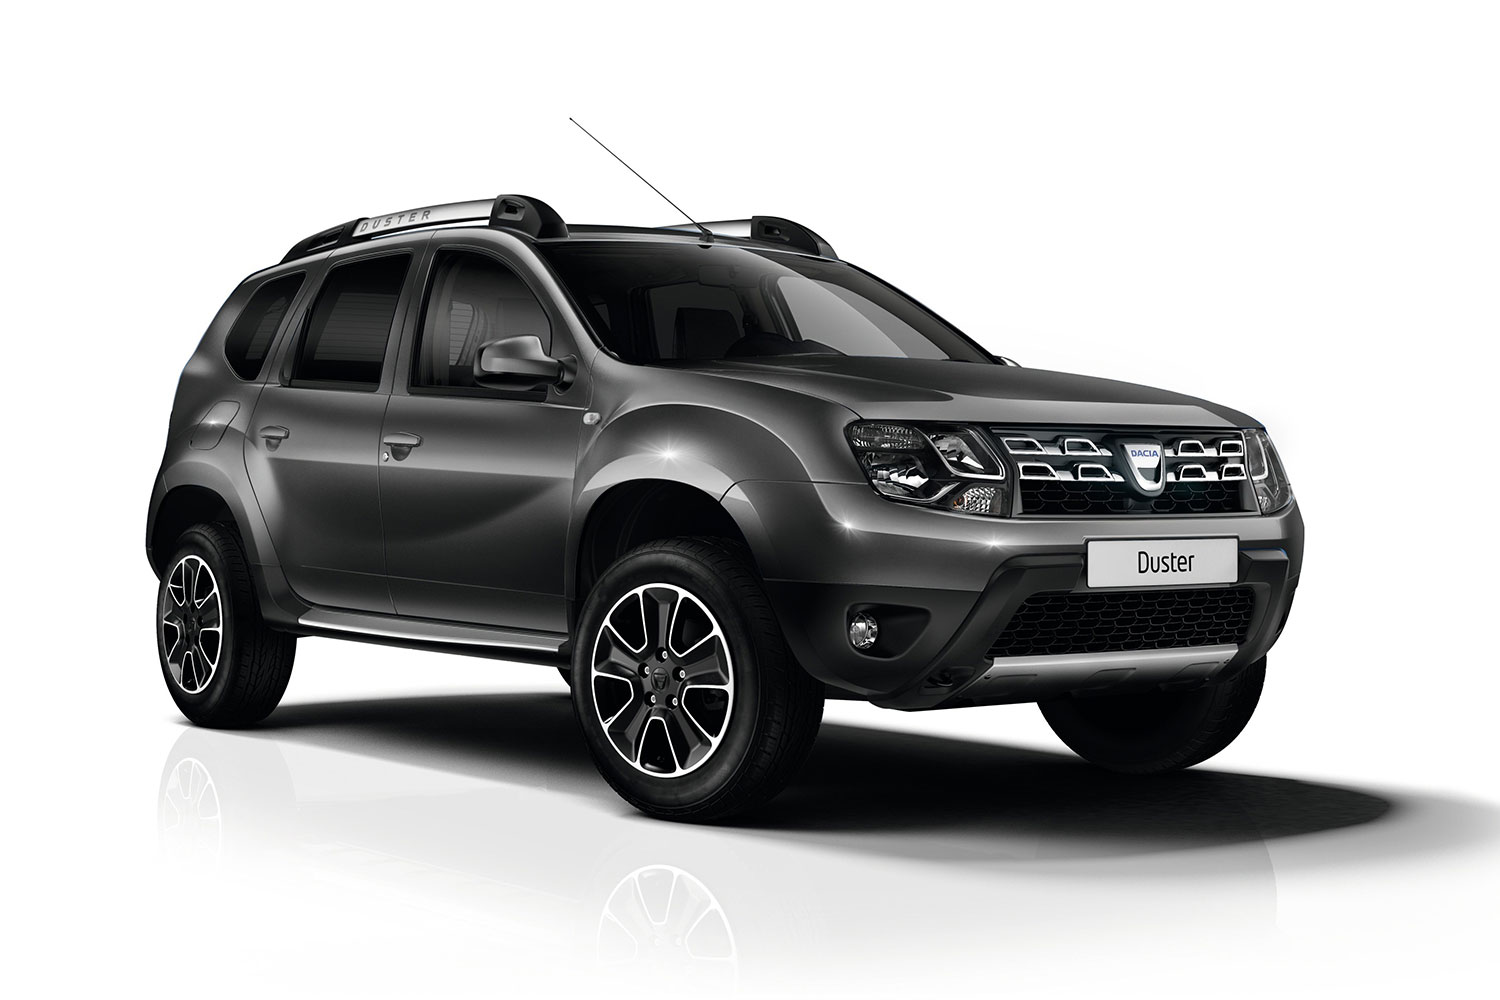 romanias dacia keeps things simple at frankfurt with small tech upgrades 71150 global en